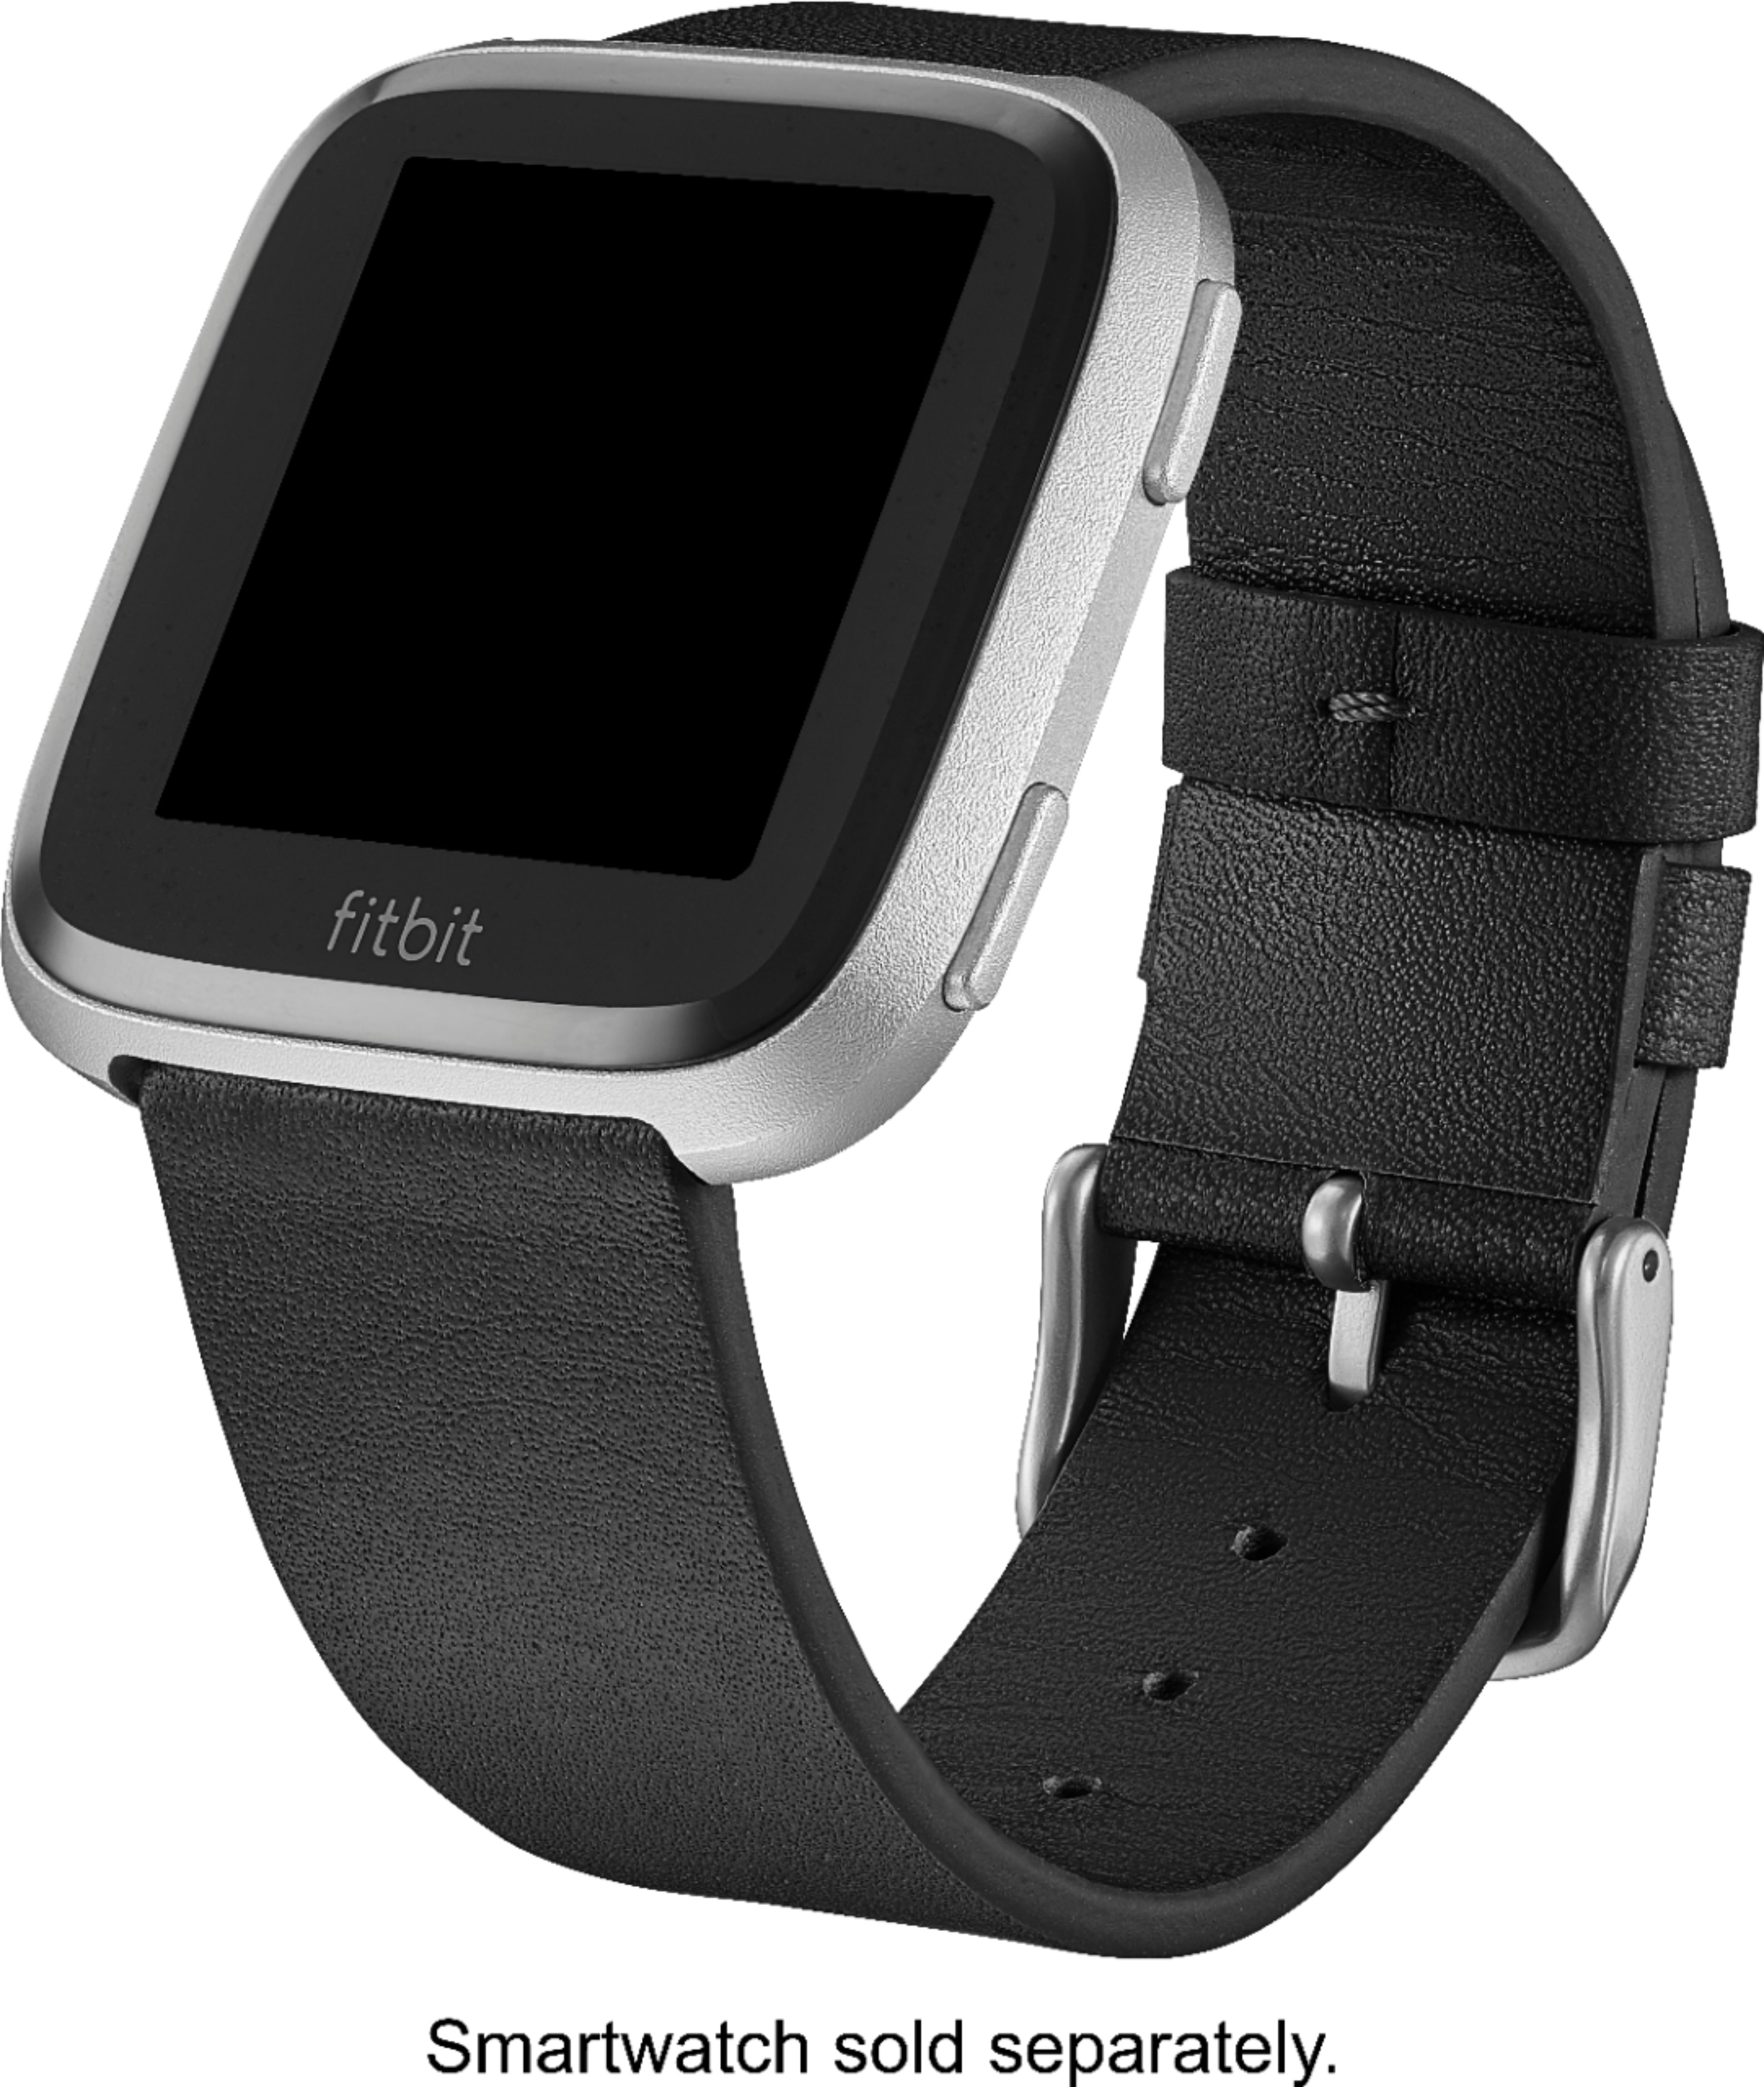 Left View: Platinum™ - Horween Leather Watch Band for Fitbit Versa 2, Fitbit Versa and Fitbit Versa Lite - Black